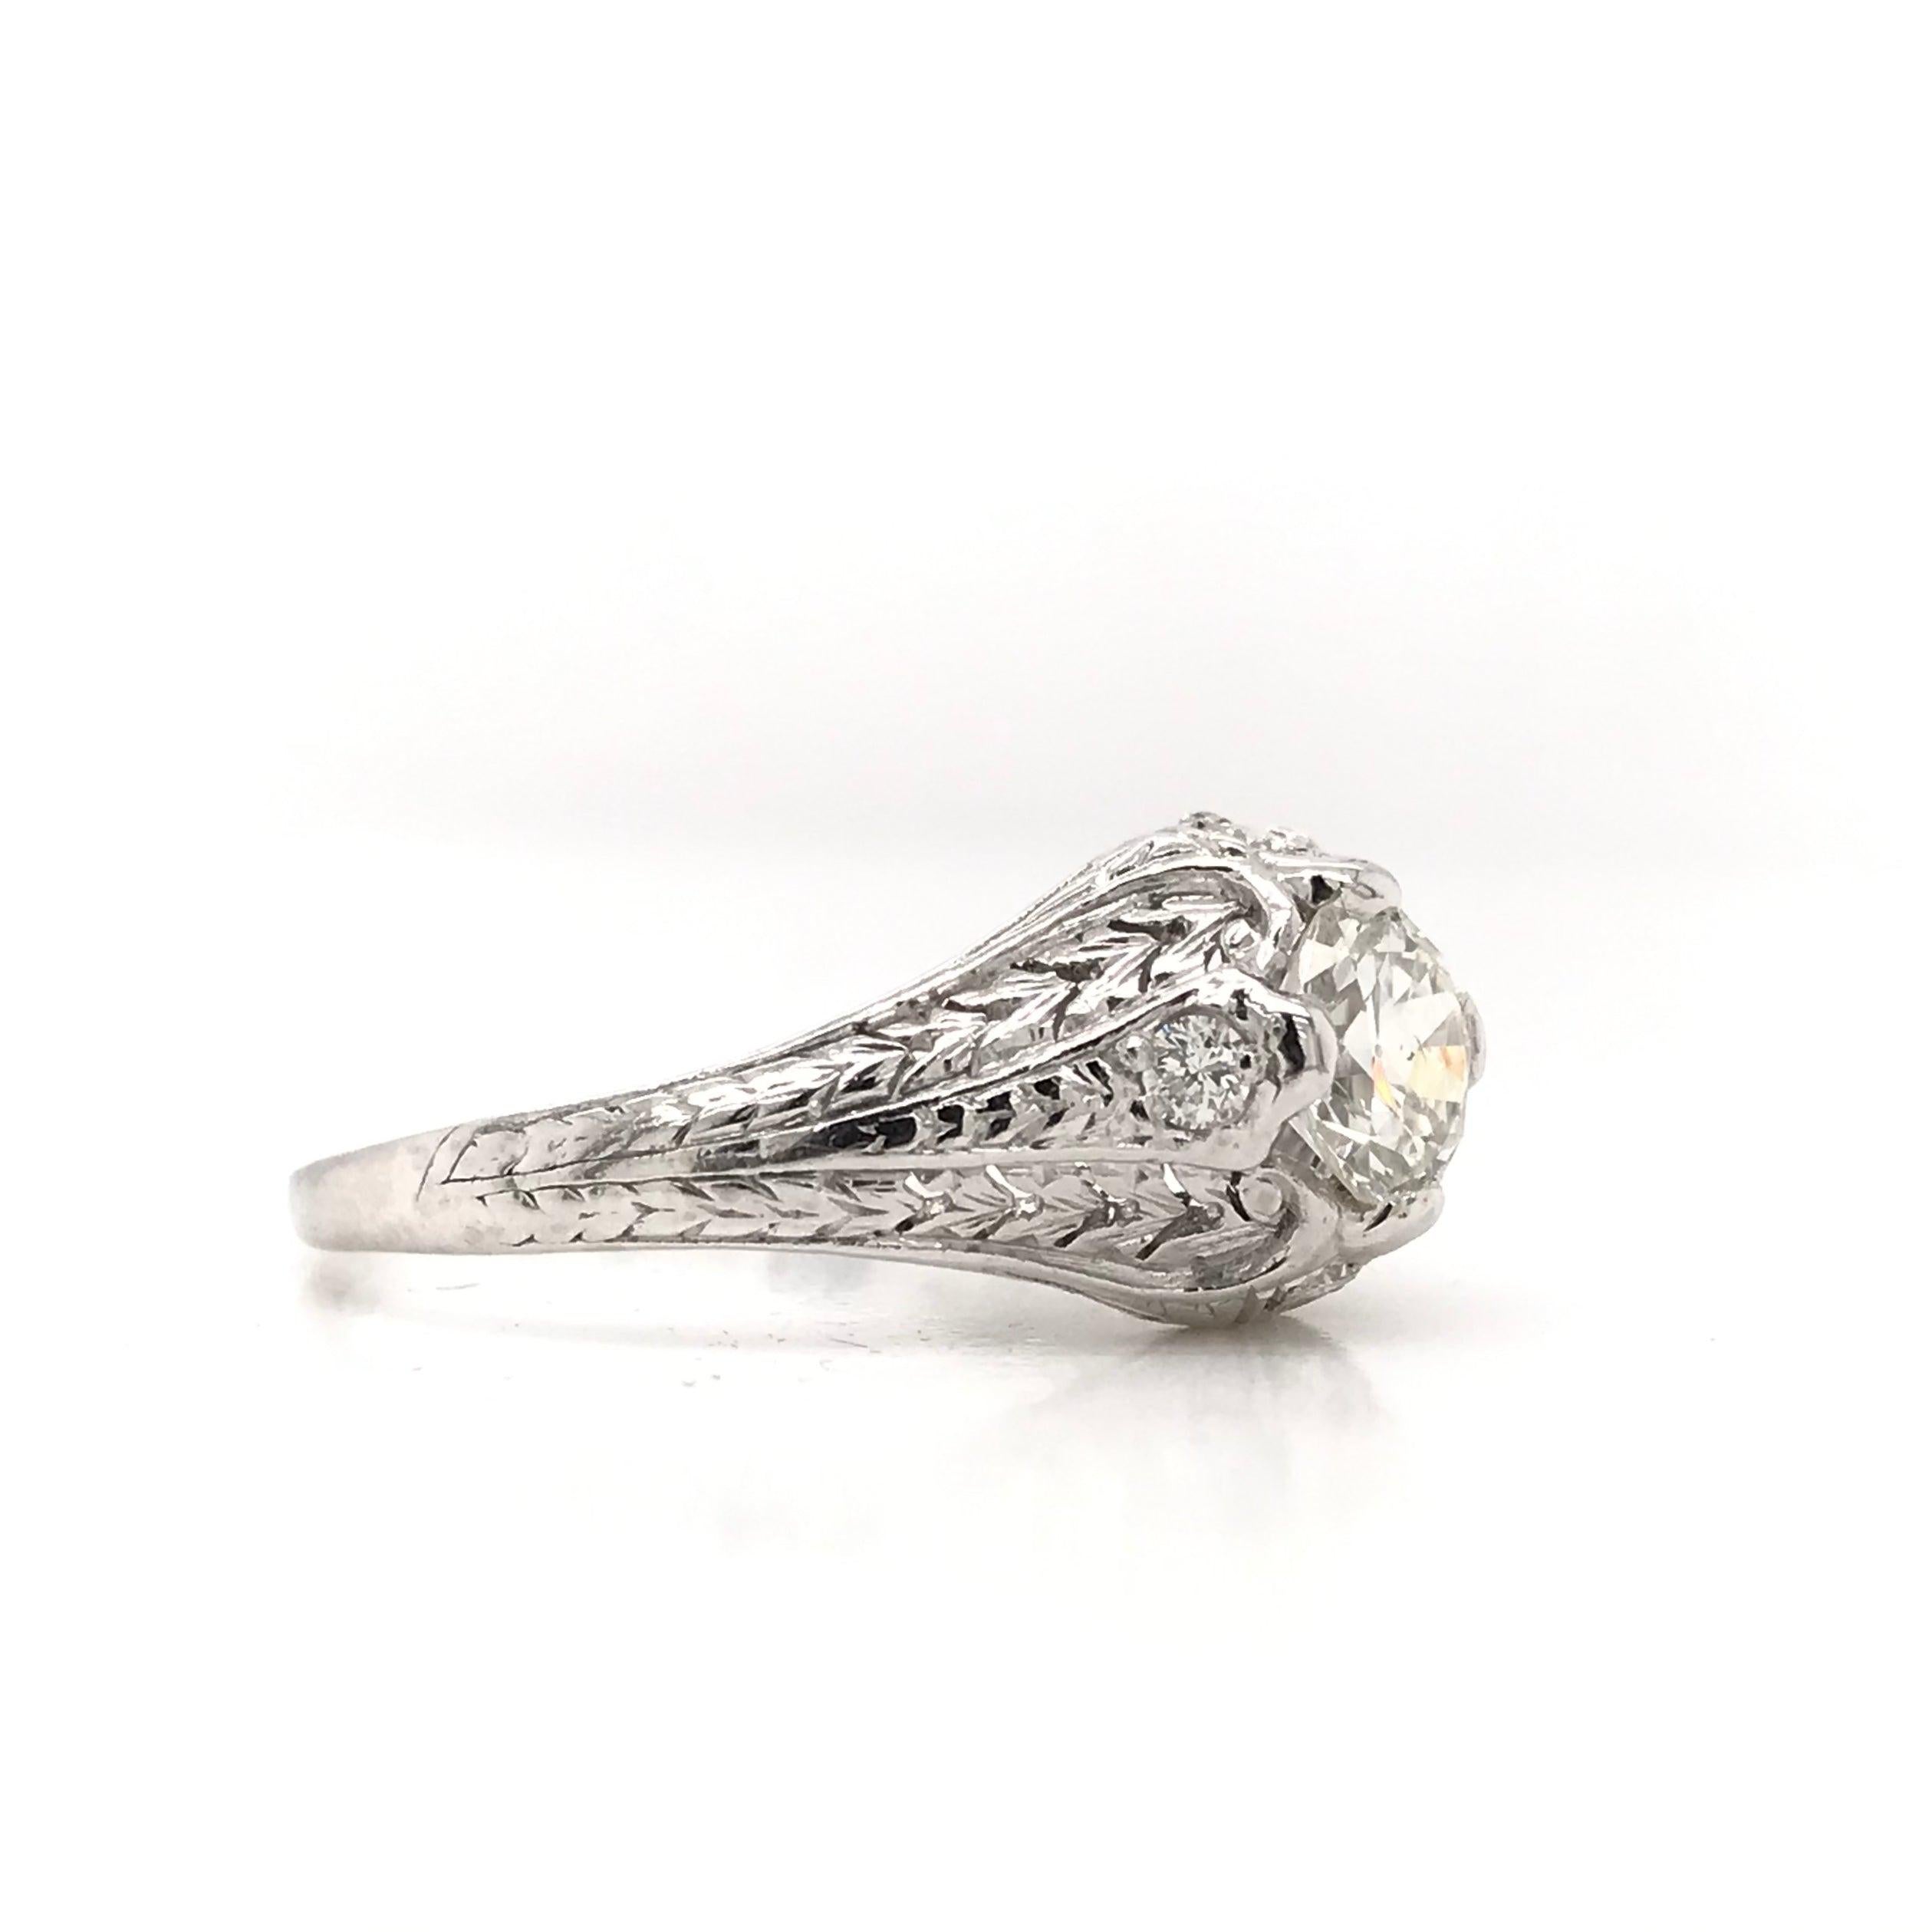 Edwardian 0.71 Carat Diamond and Platinum Solitaire Ring In Excellent Condition For Sale In Montgomery, AL